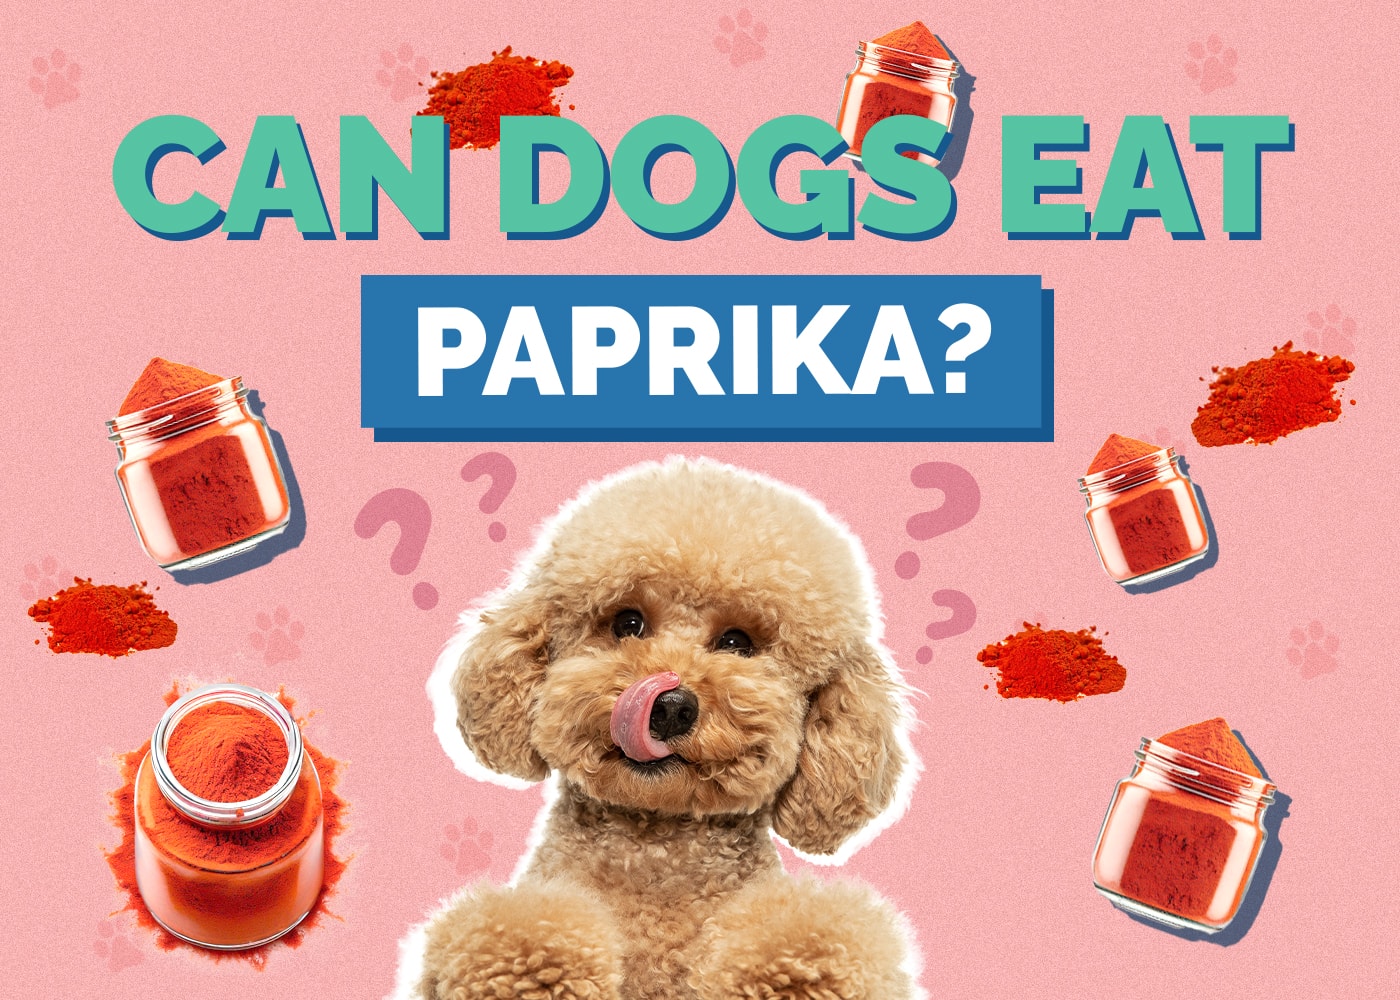 Can Dogs Eat paprika